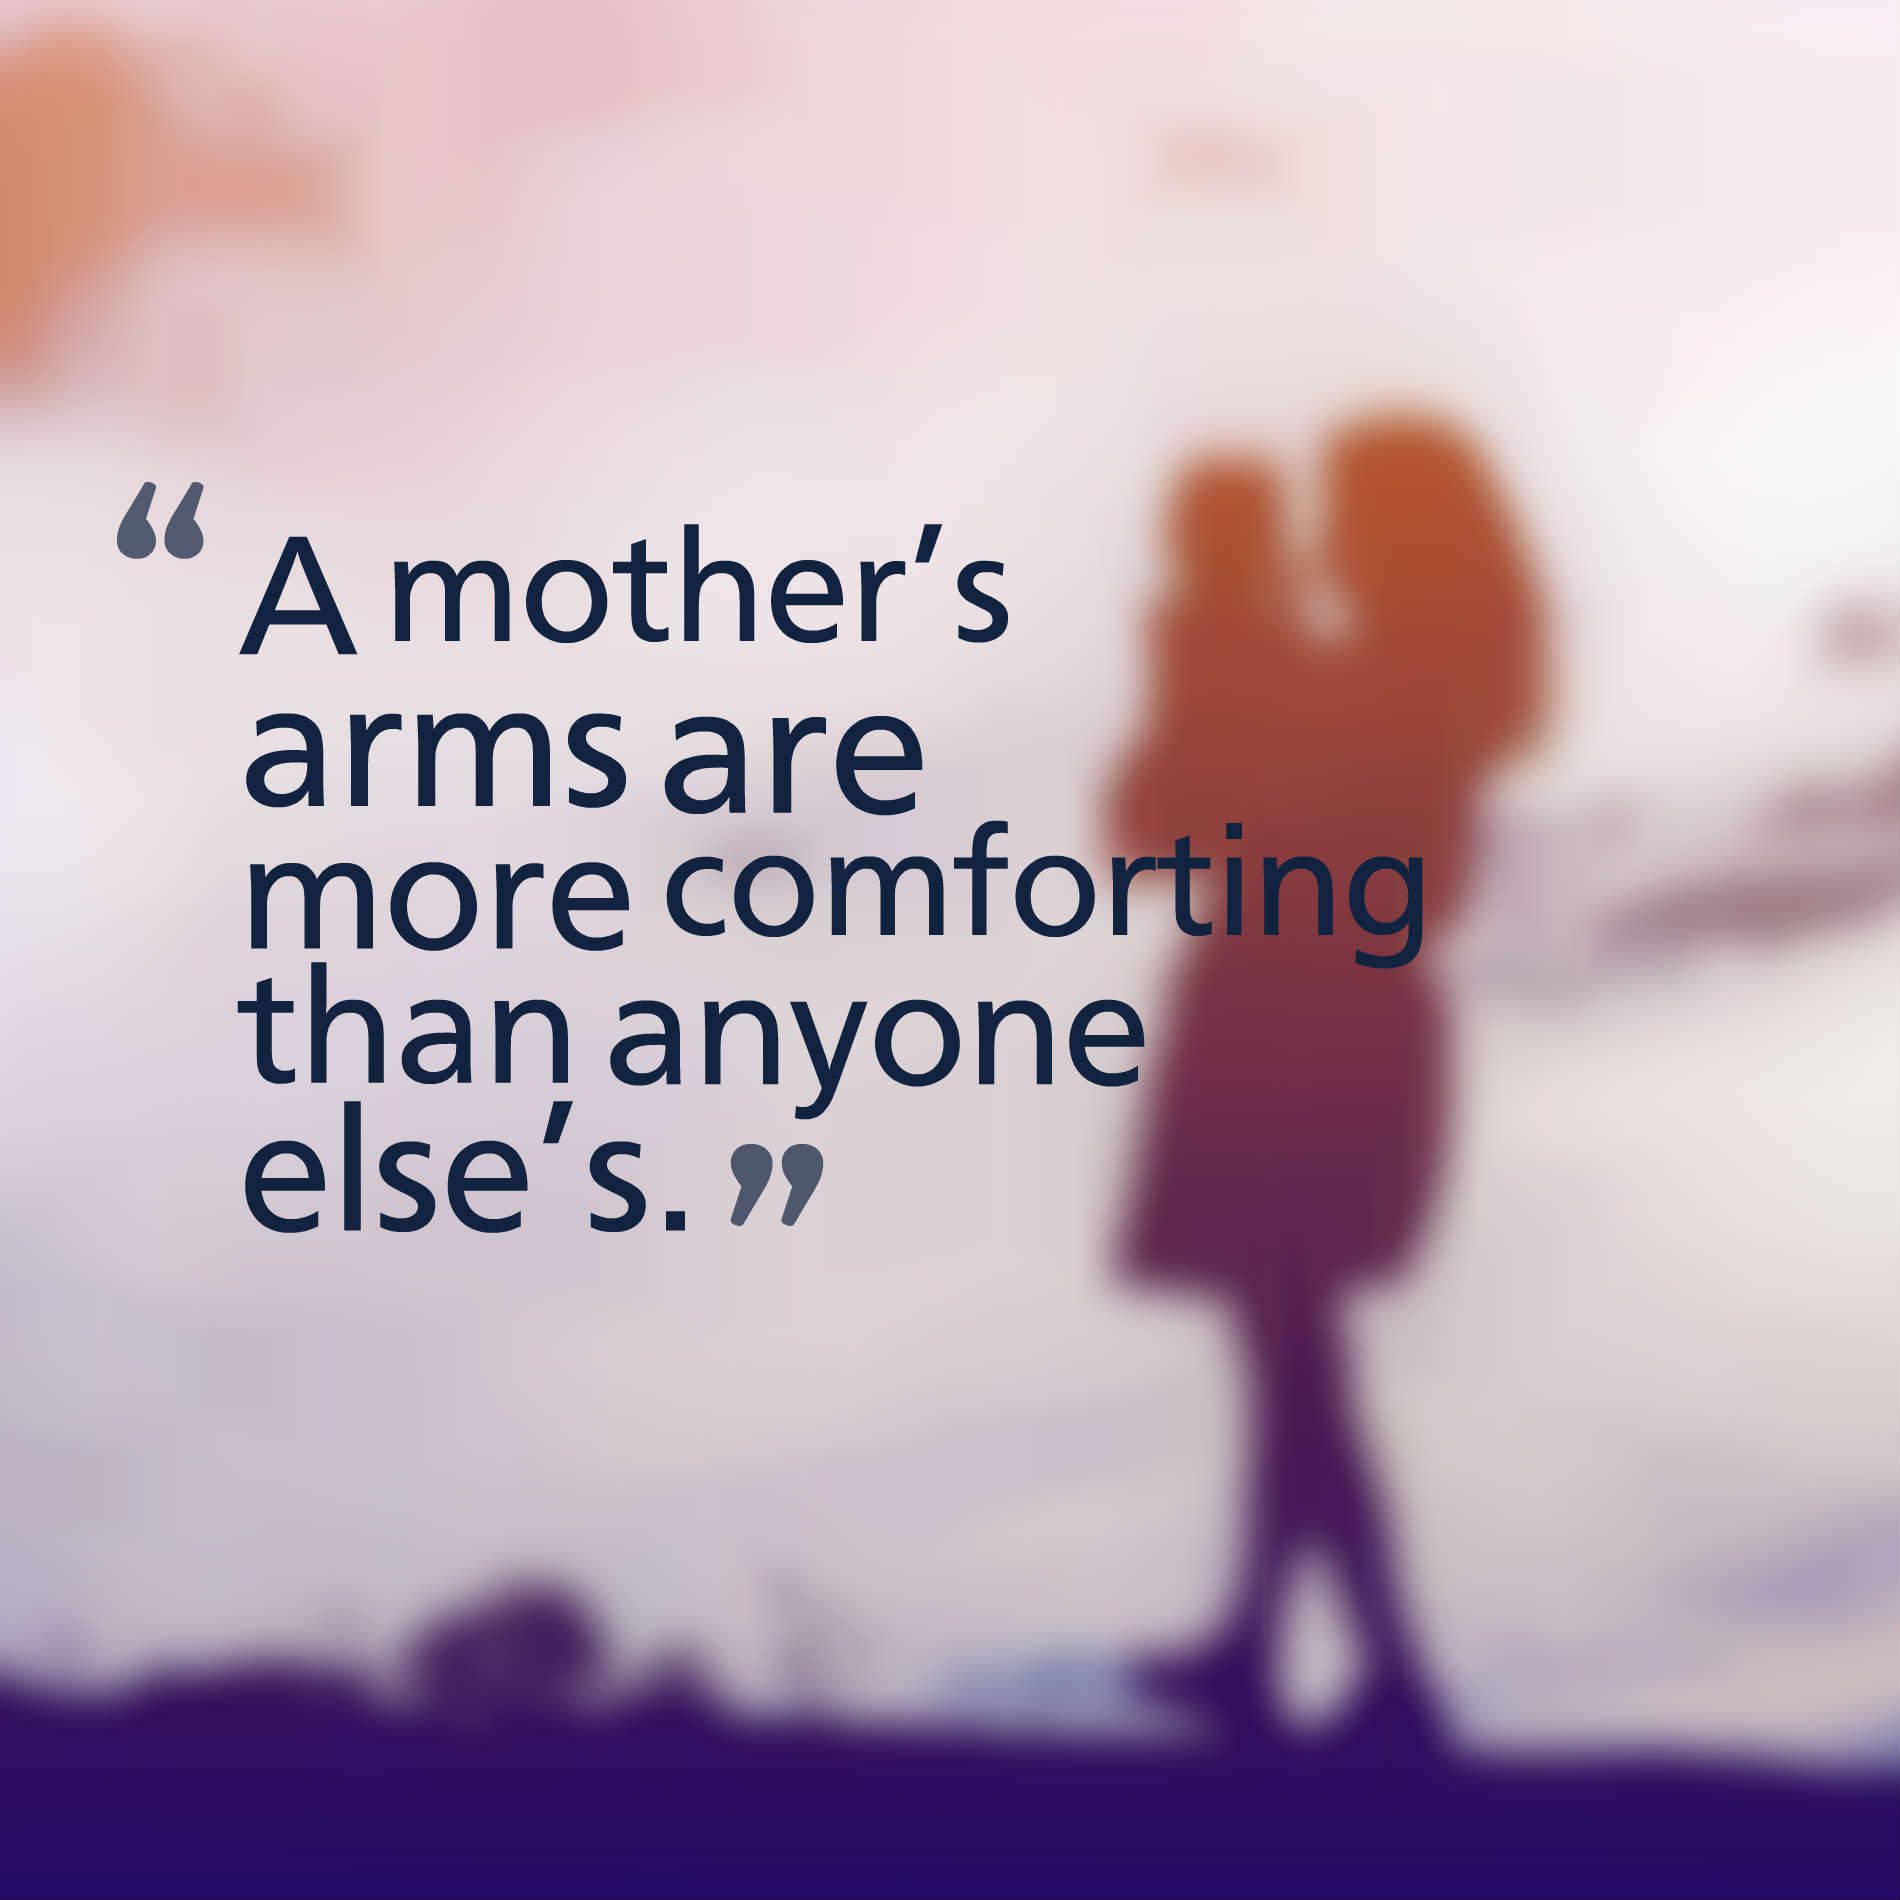 A mother’s arms are more comforting than anyone else’s.